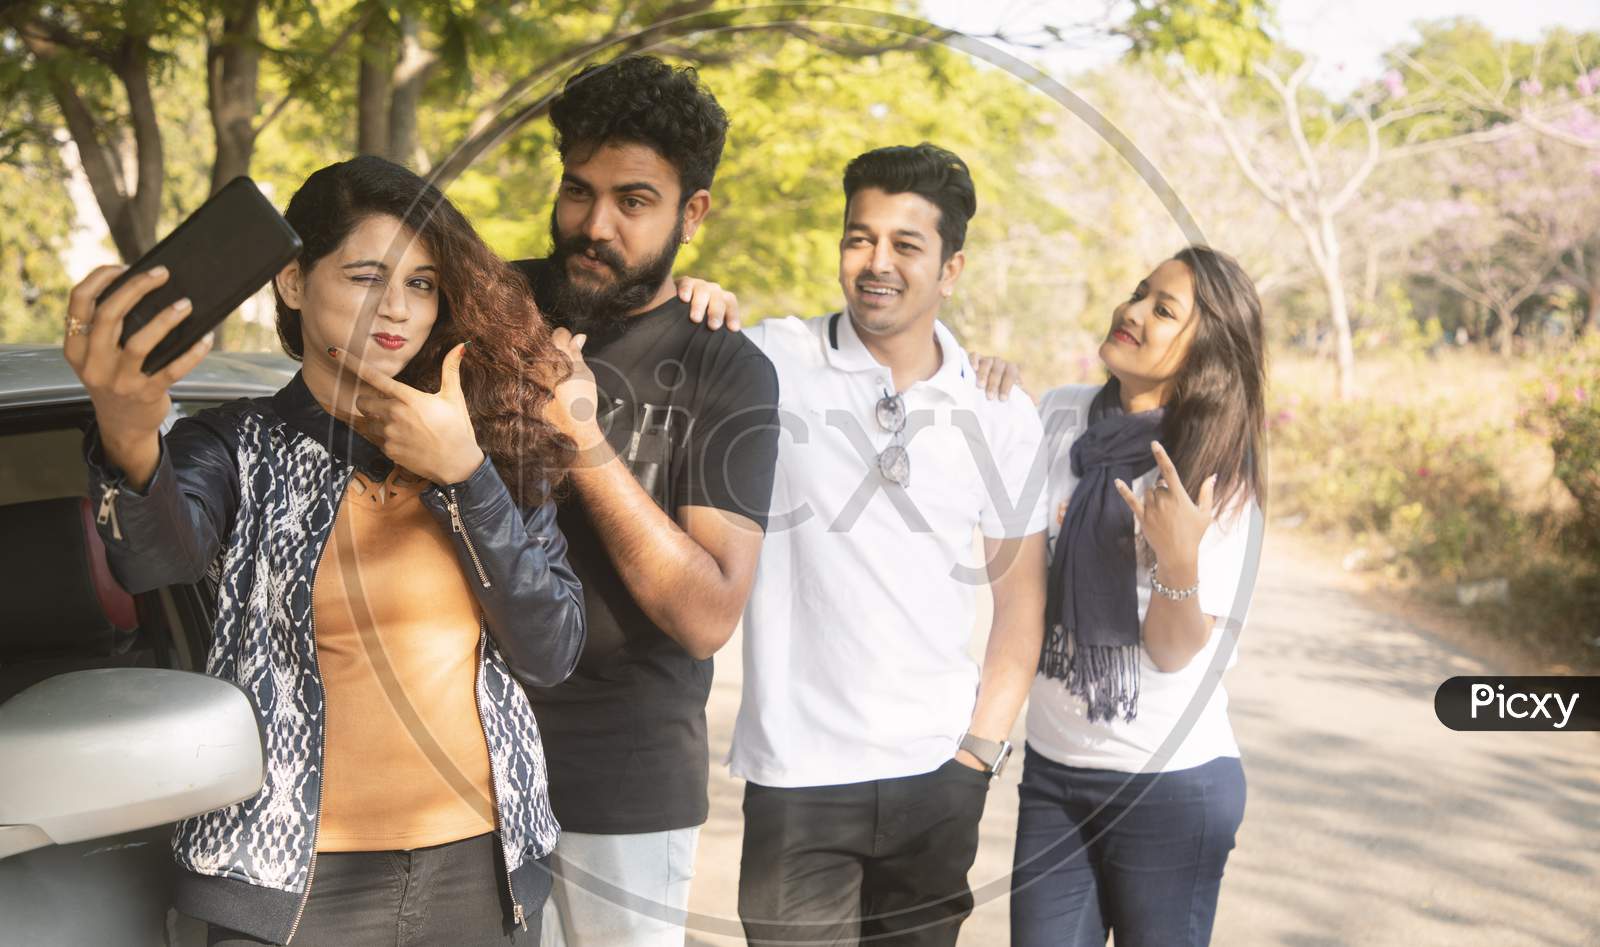 A Group of Happy Young People taking a Selfie using Mobile Phone or Smartphone At Outdoors